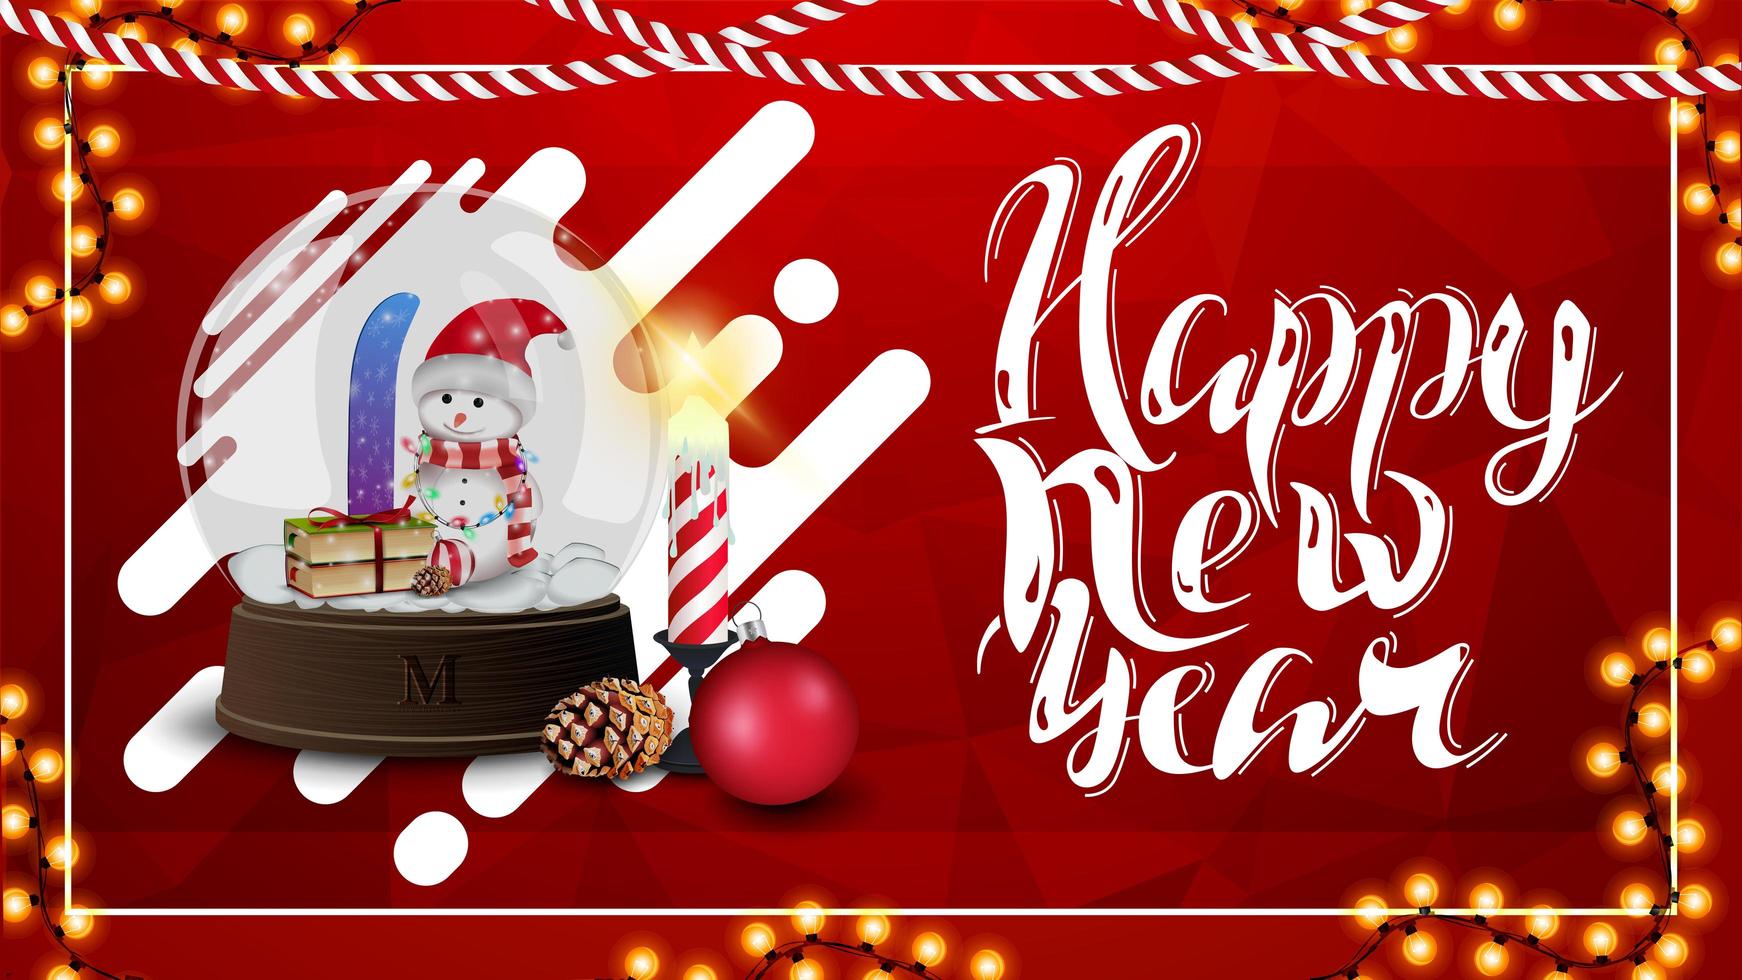 Happy New Year, red postcard with polygonal texture and snow globe with snowmen inside vector